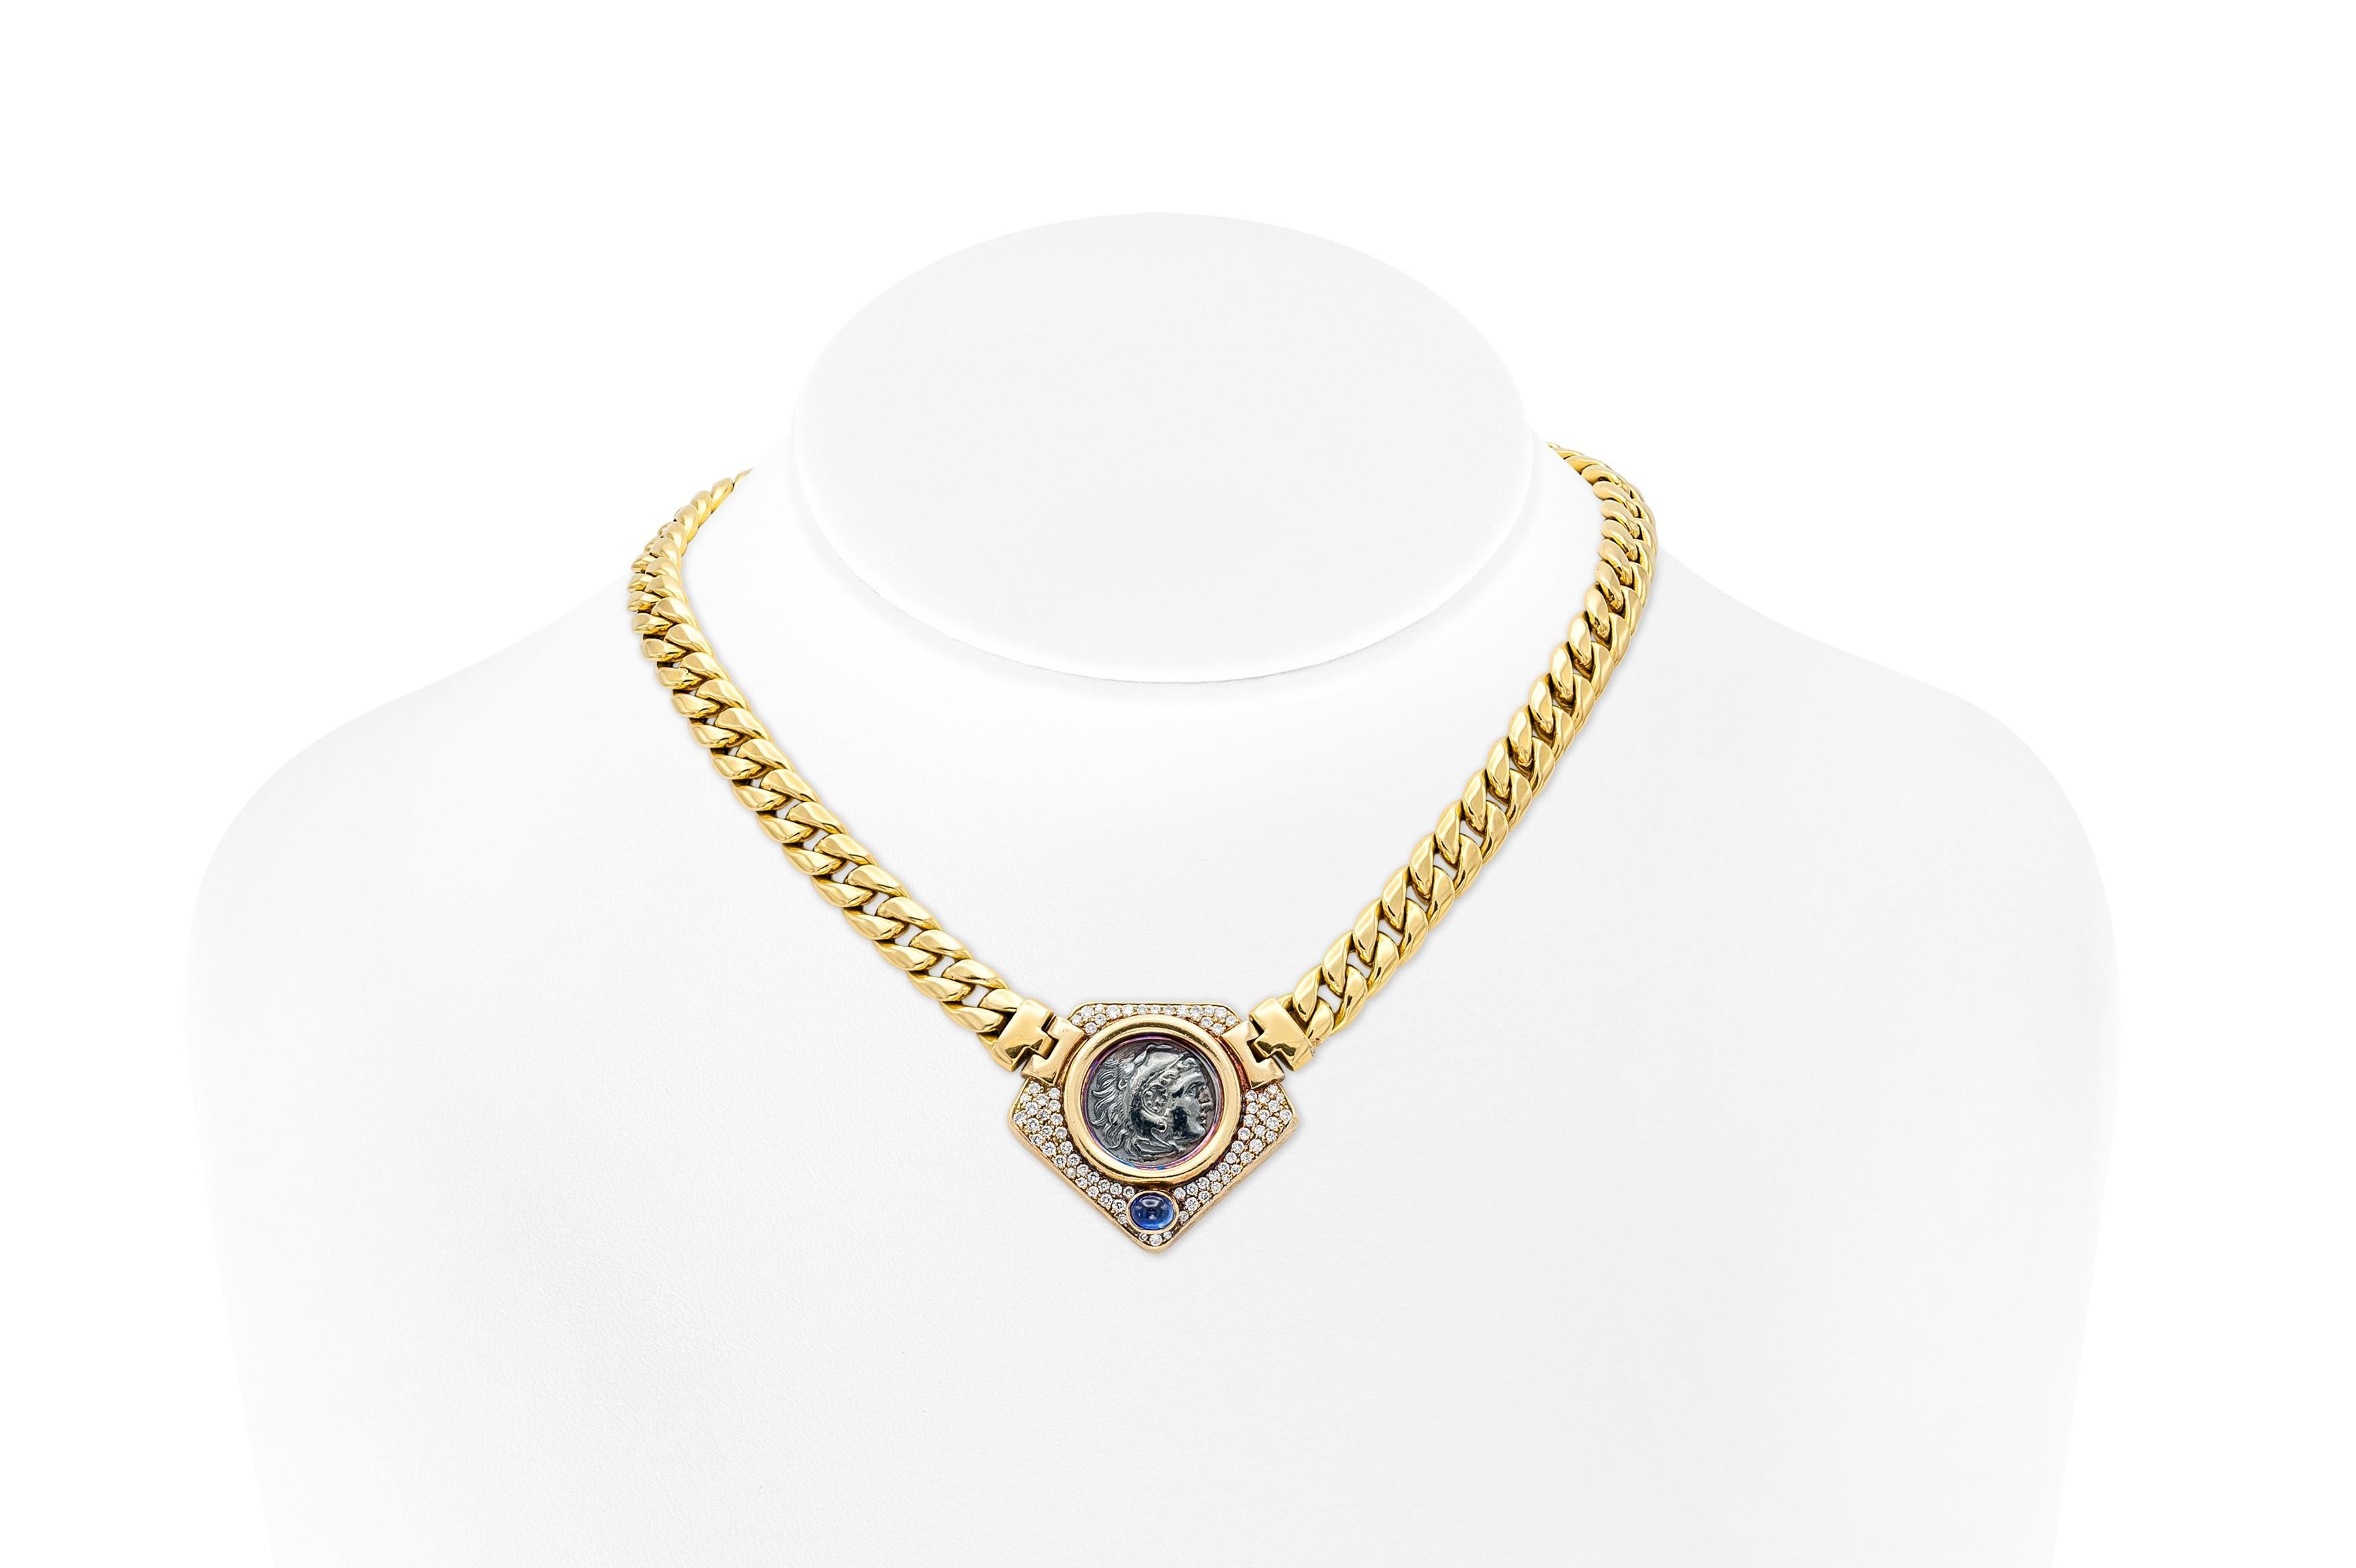 Finely crafted in 18k yellow gold with a Roman coin, Round Brilliant cut Diamonds weighing approximately a total of 2.00 carats, and a Cabochon Sapphire weighing approximately 0.50 carats.
Made in France
Circa 1960s
16 1/2 inches long